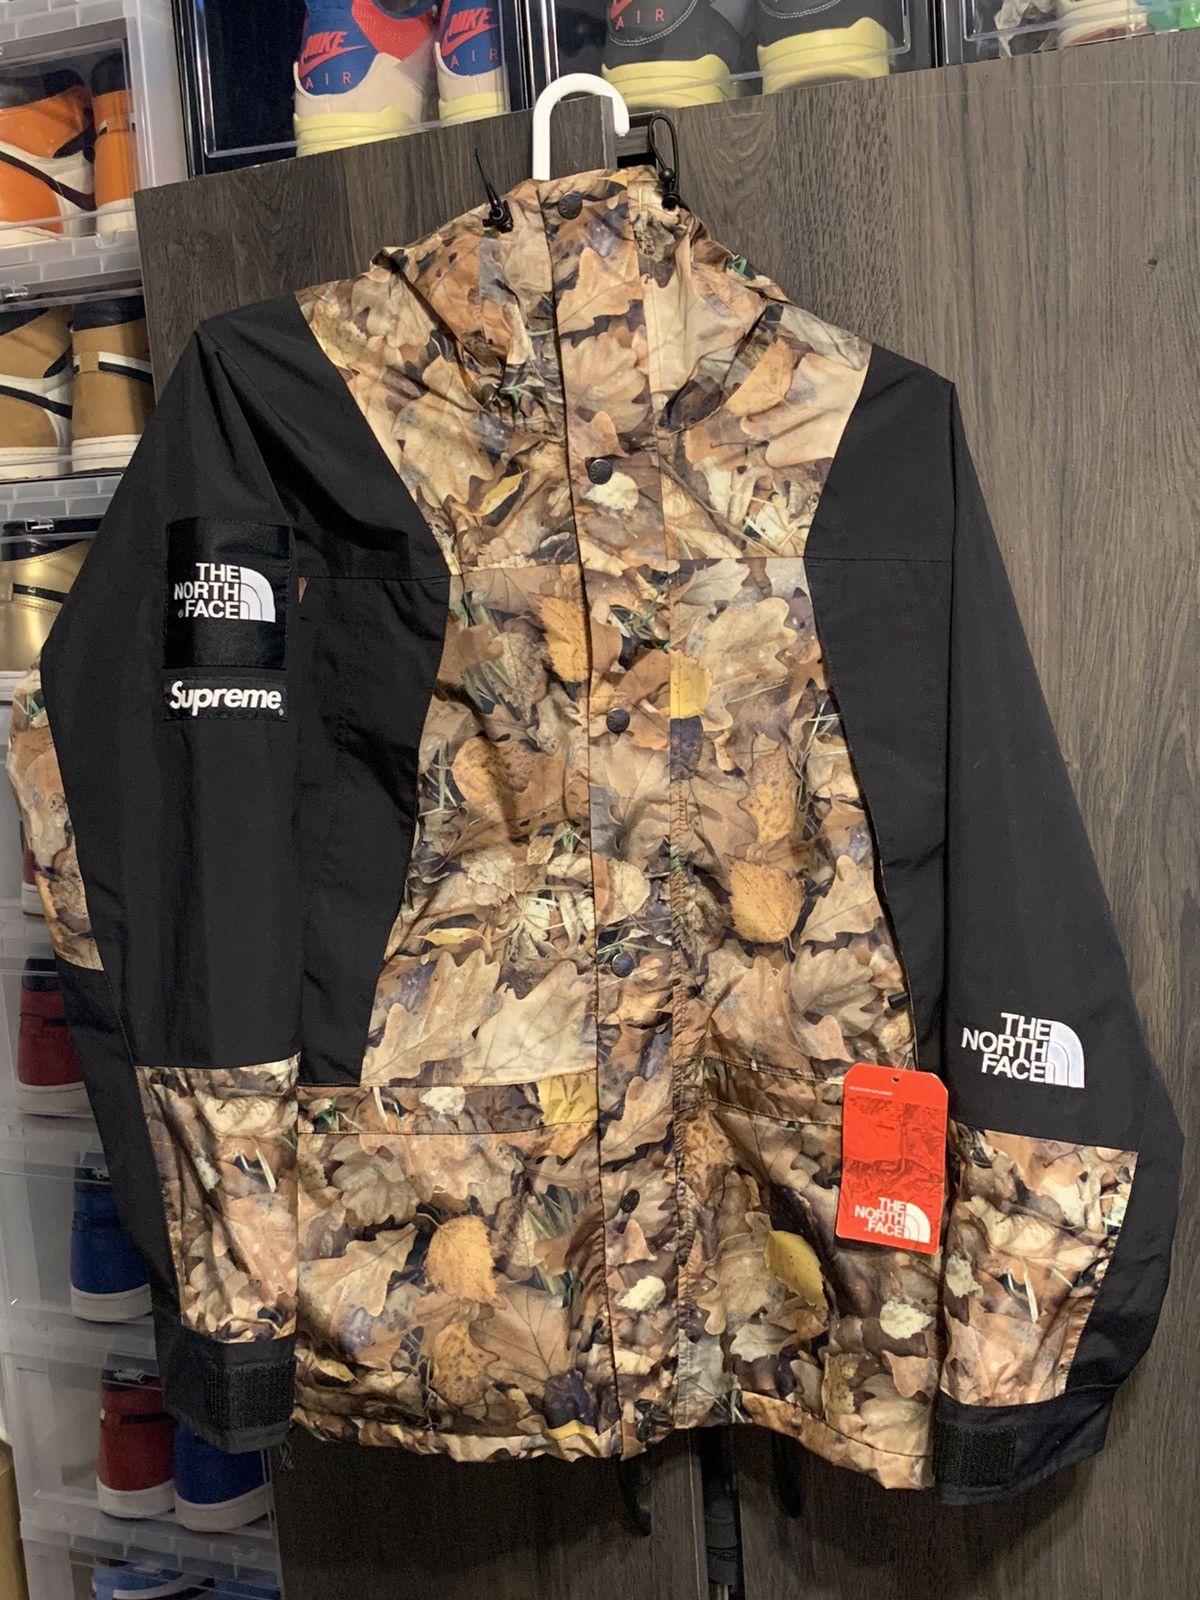 Supreme Supreme The North Face Leaves Mountain Light Jacket | Grailed